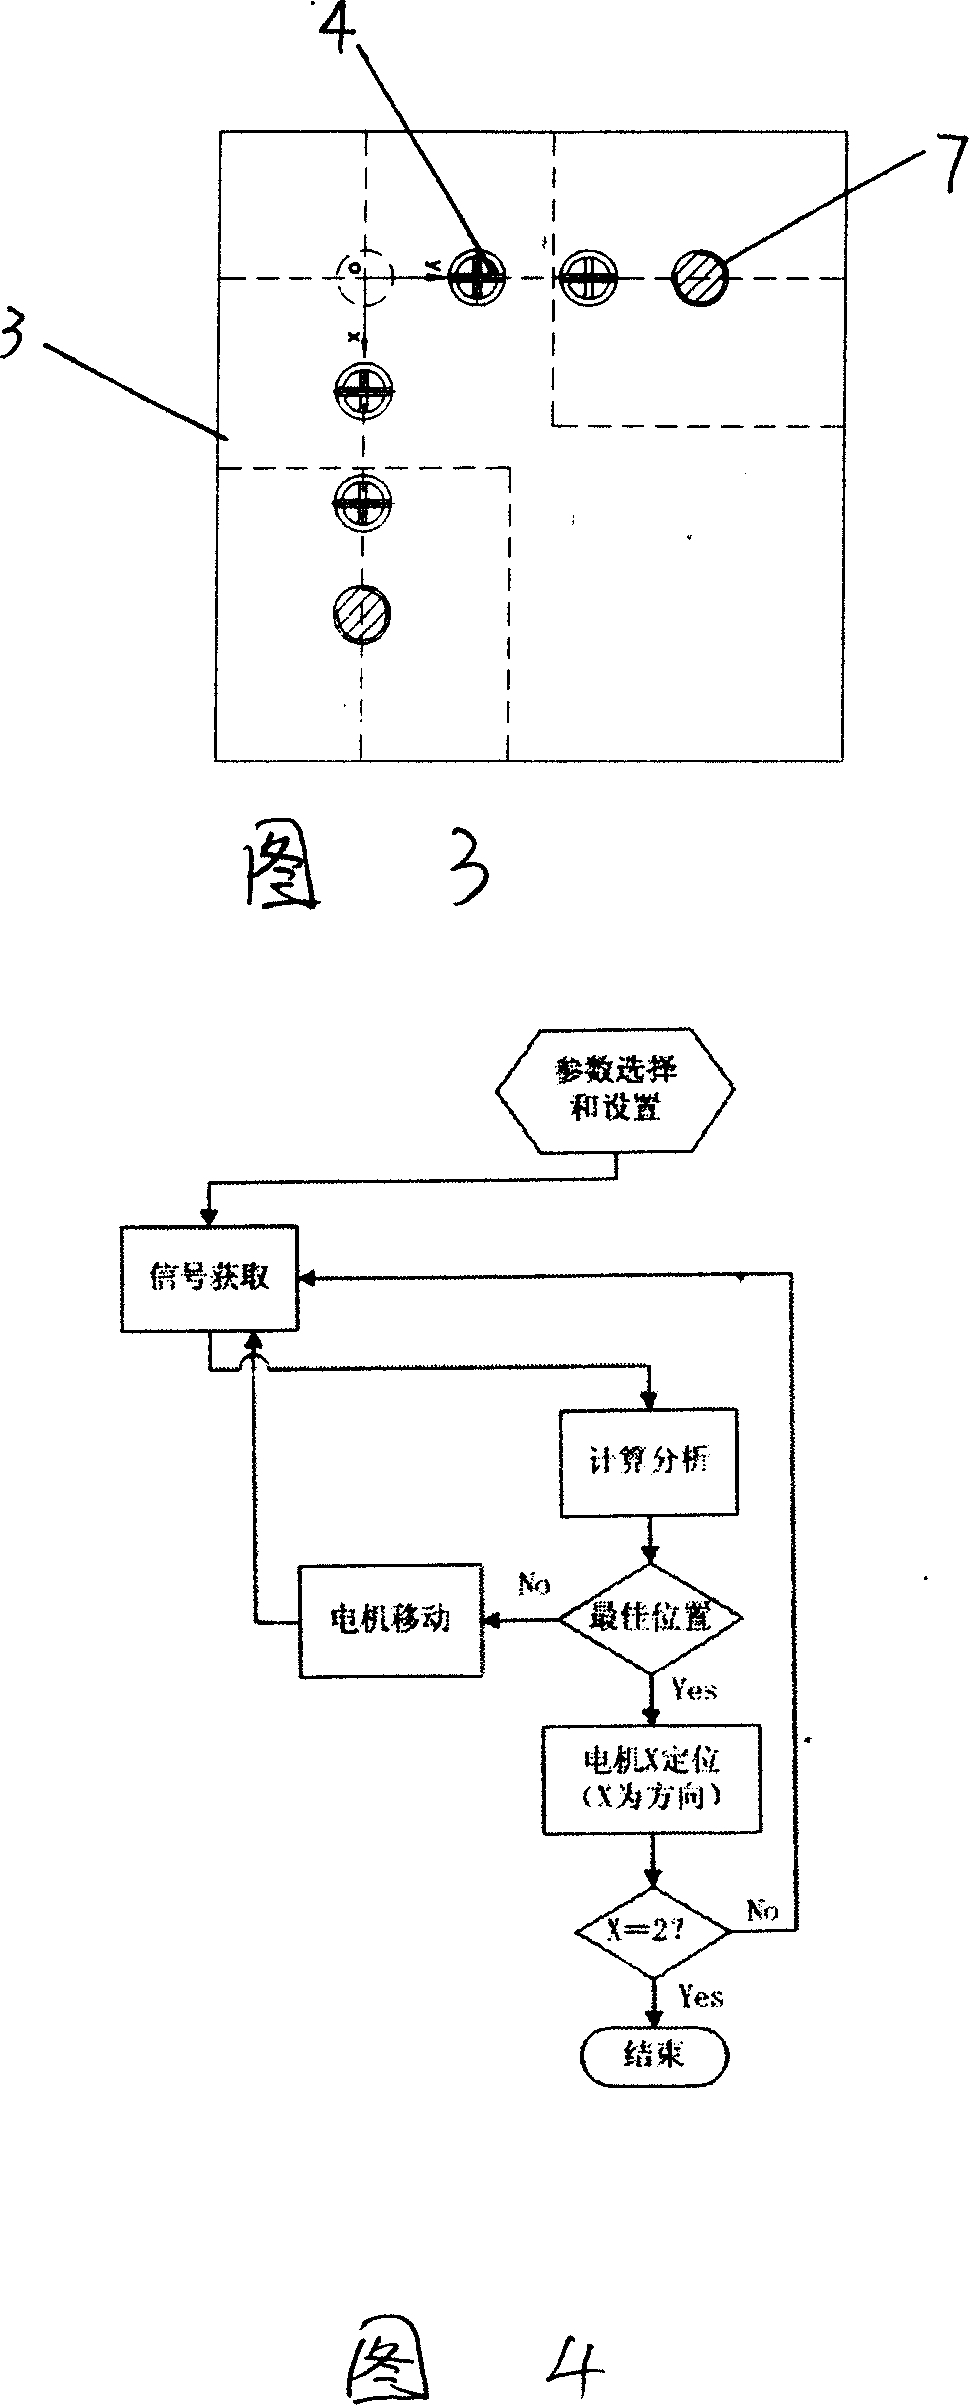 Automatic collimating method and collimator set for light path of colidar